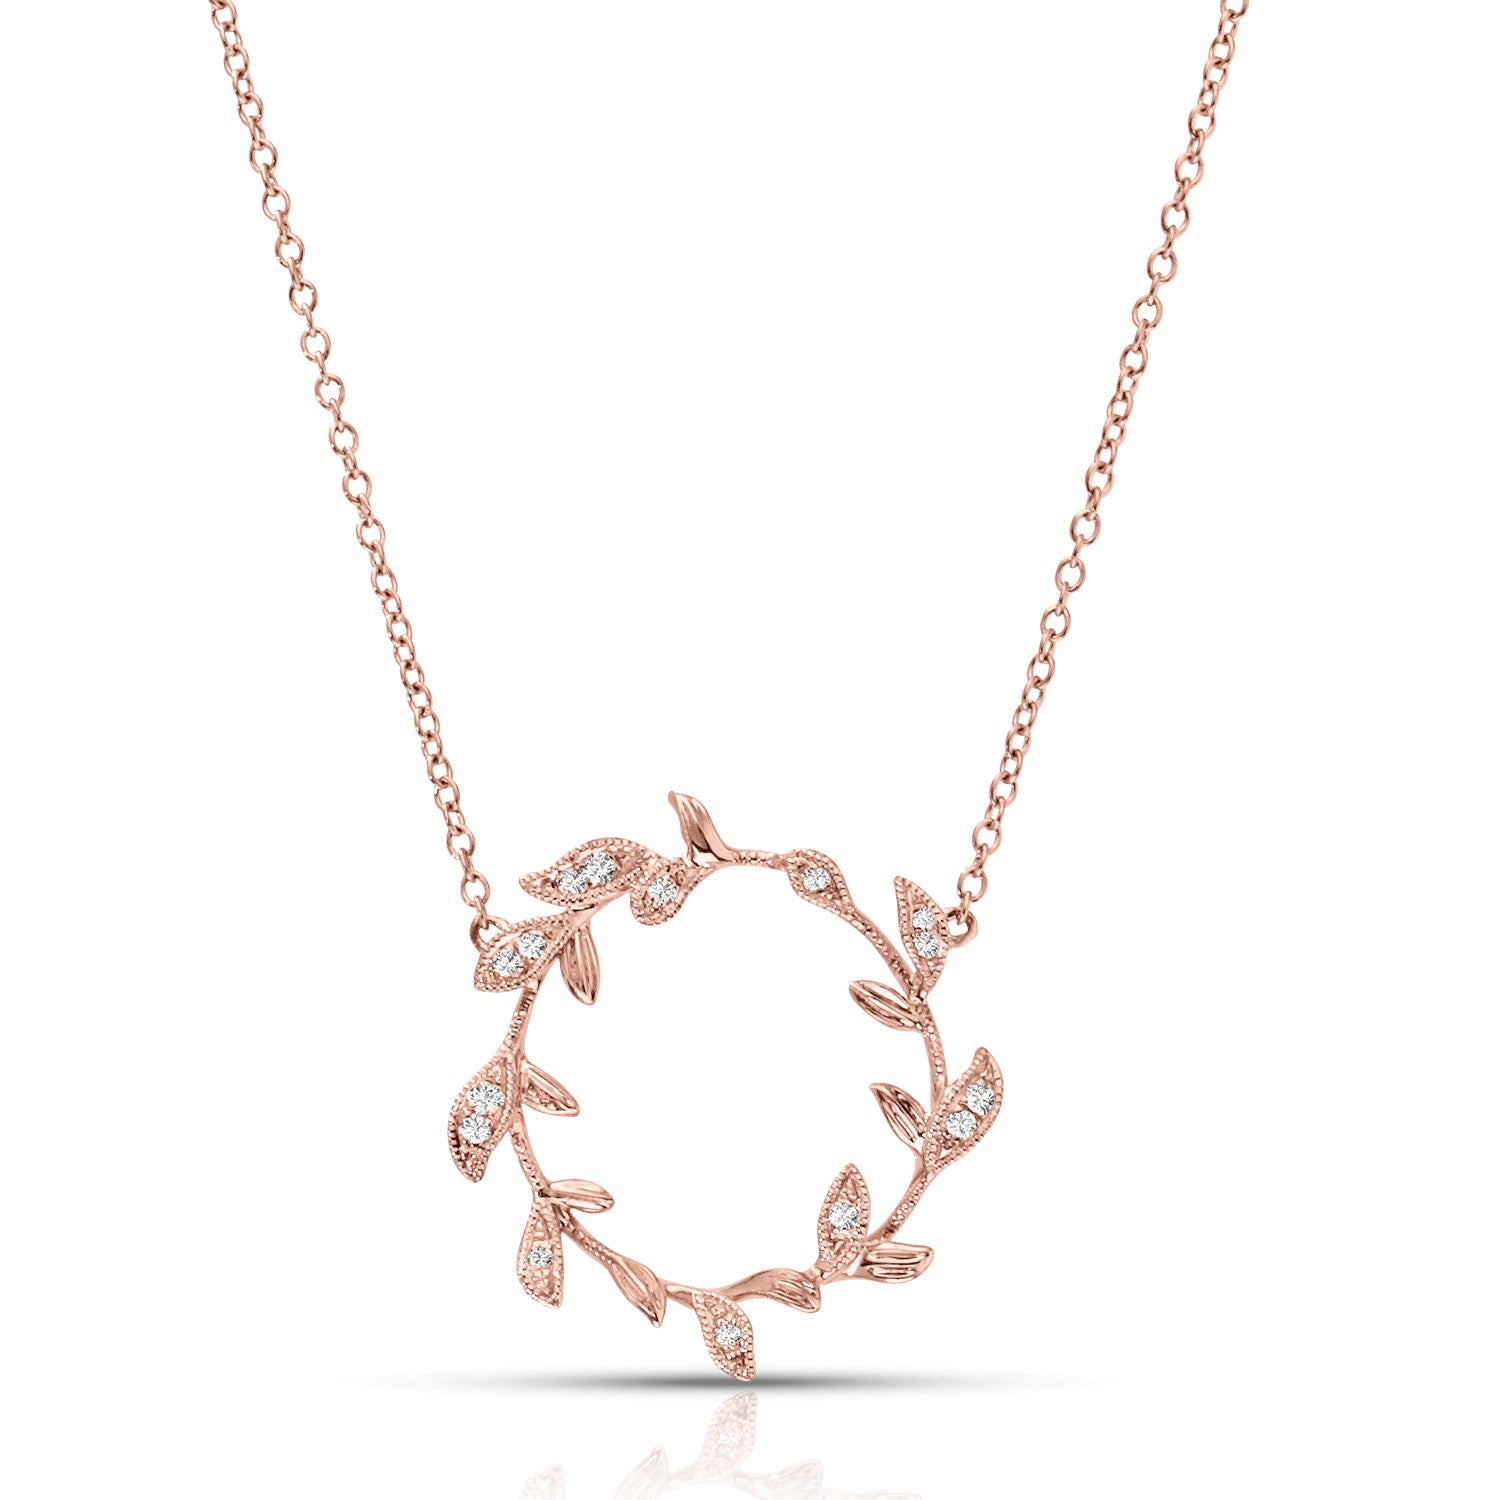 14K Couture Rose Gold Diamond Wreath Necklace - Crestwood Jewelers